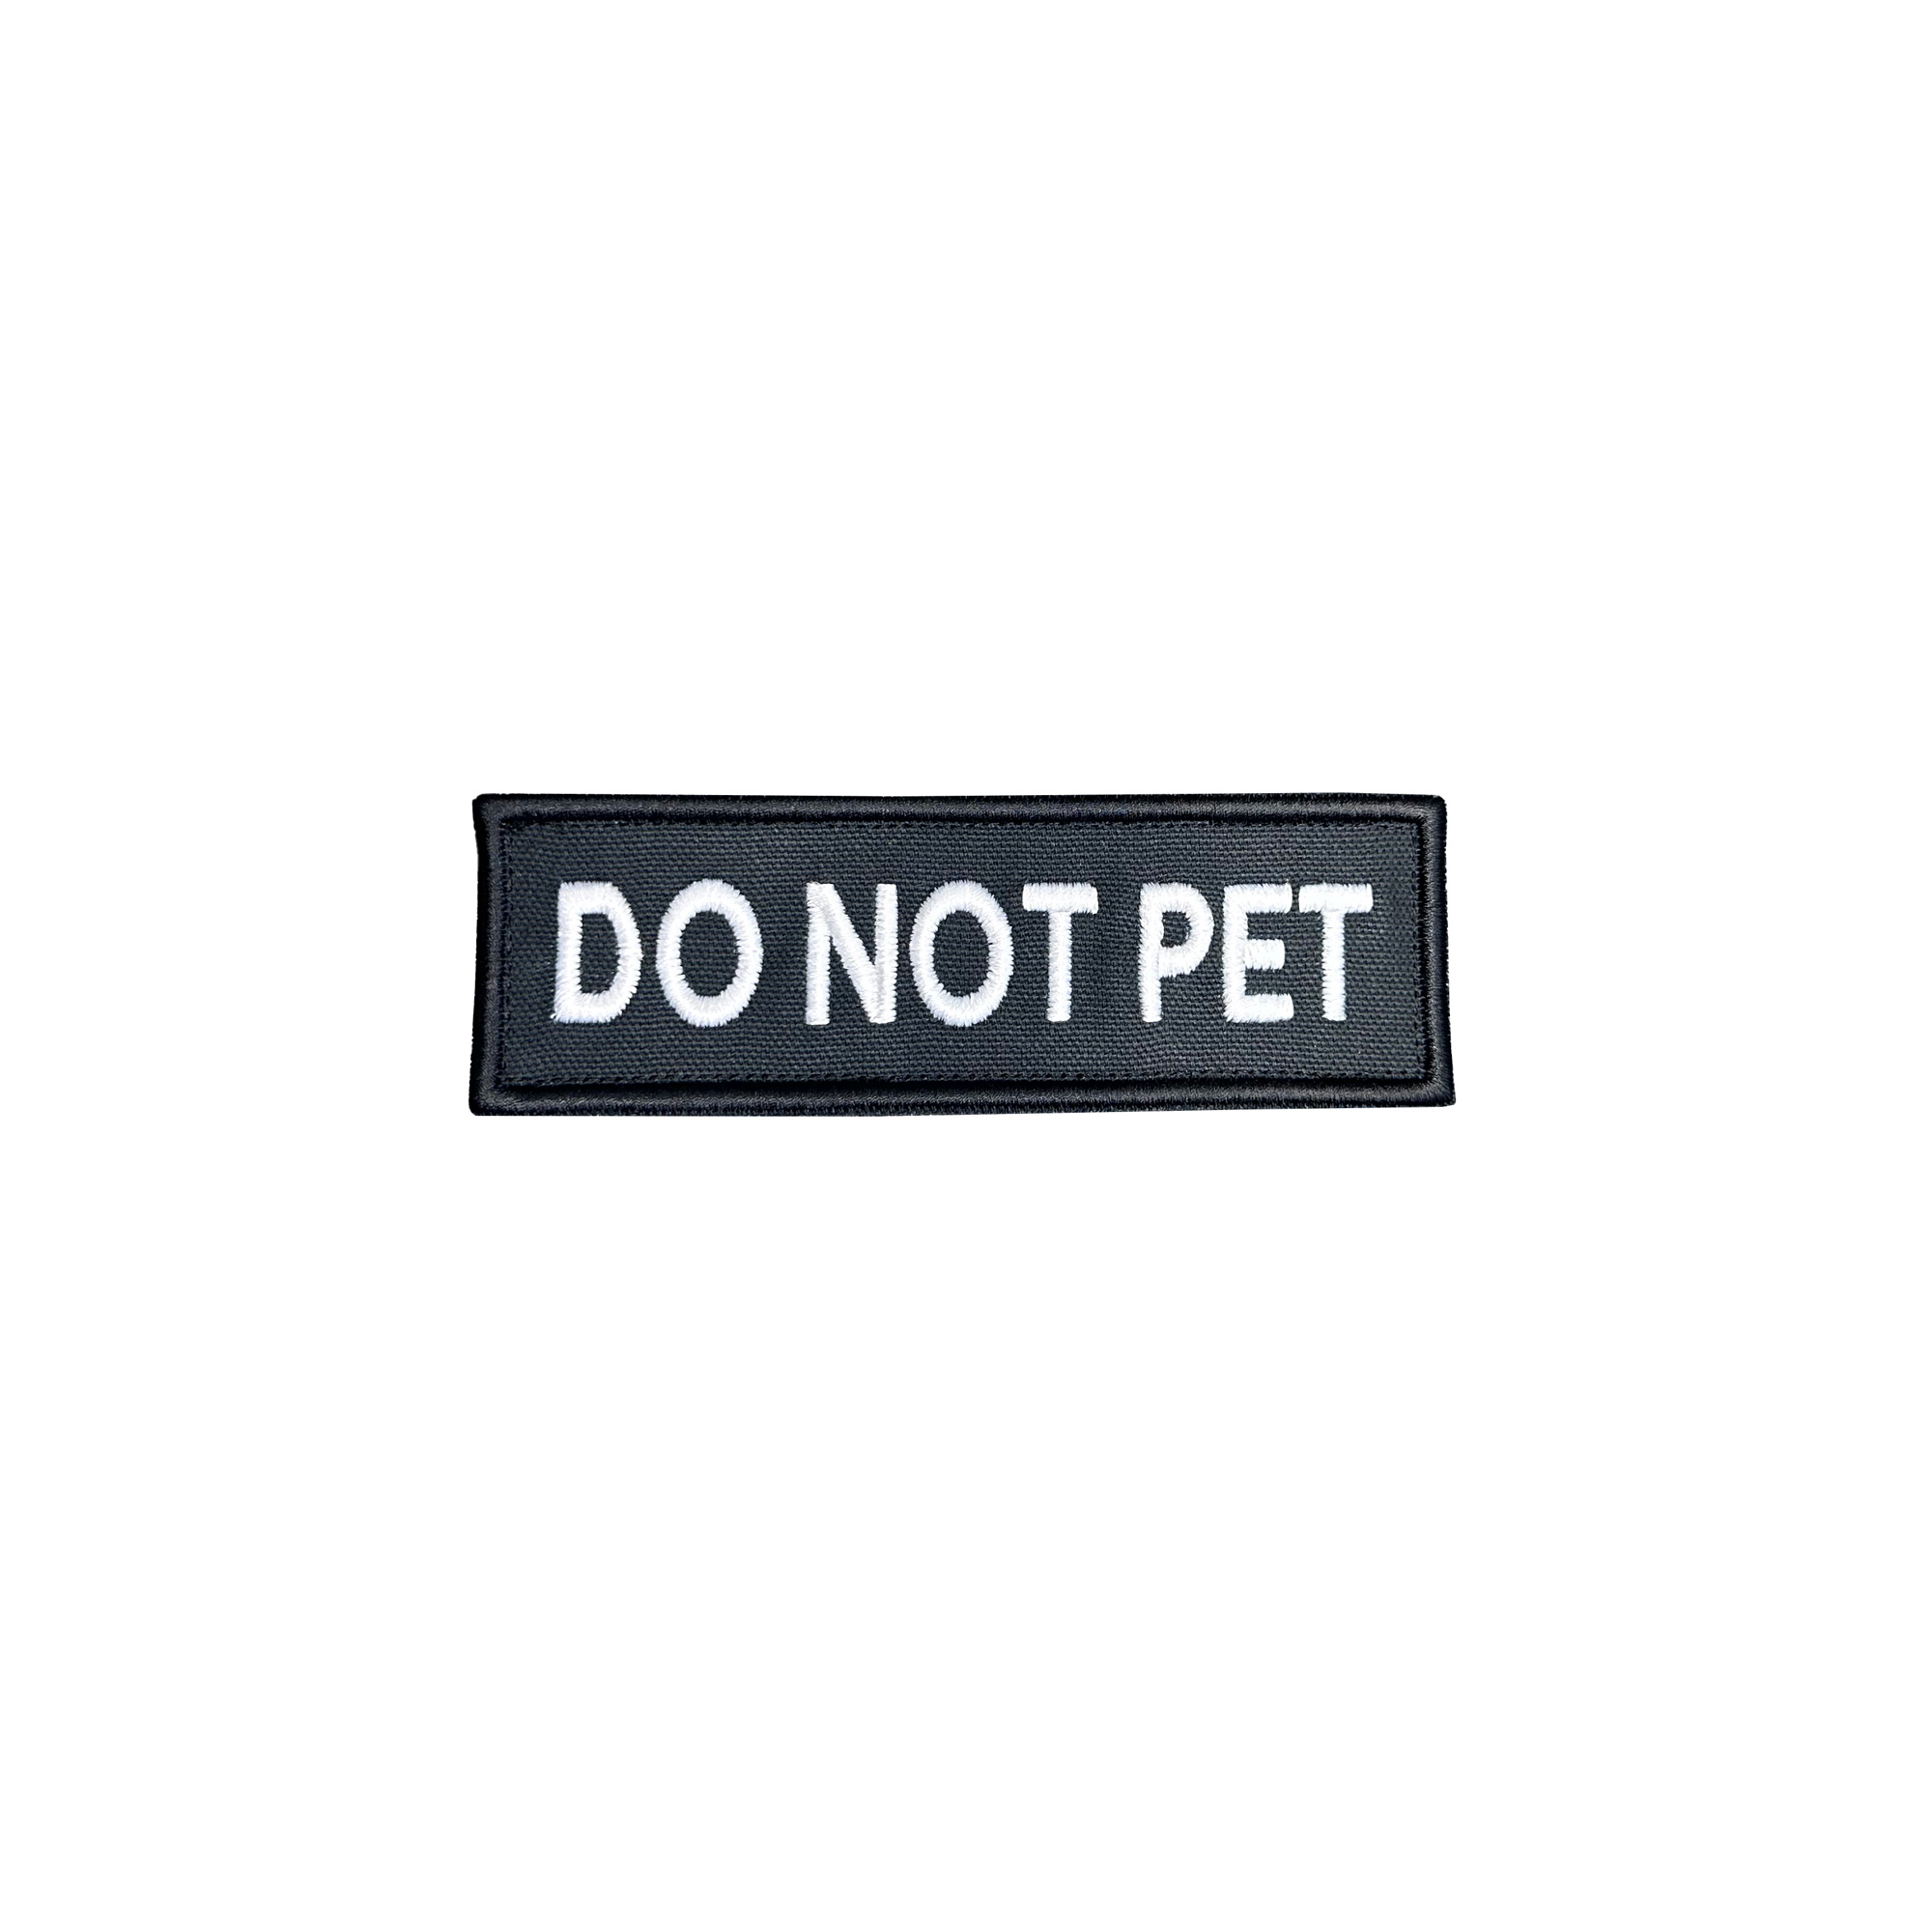 Do Not Pet - Service Dog Patches Personalize Color and Size - Pet Supply  Mafia